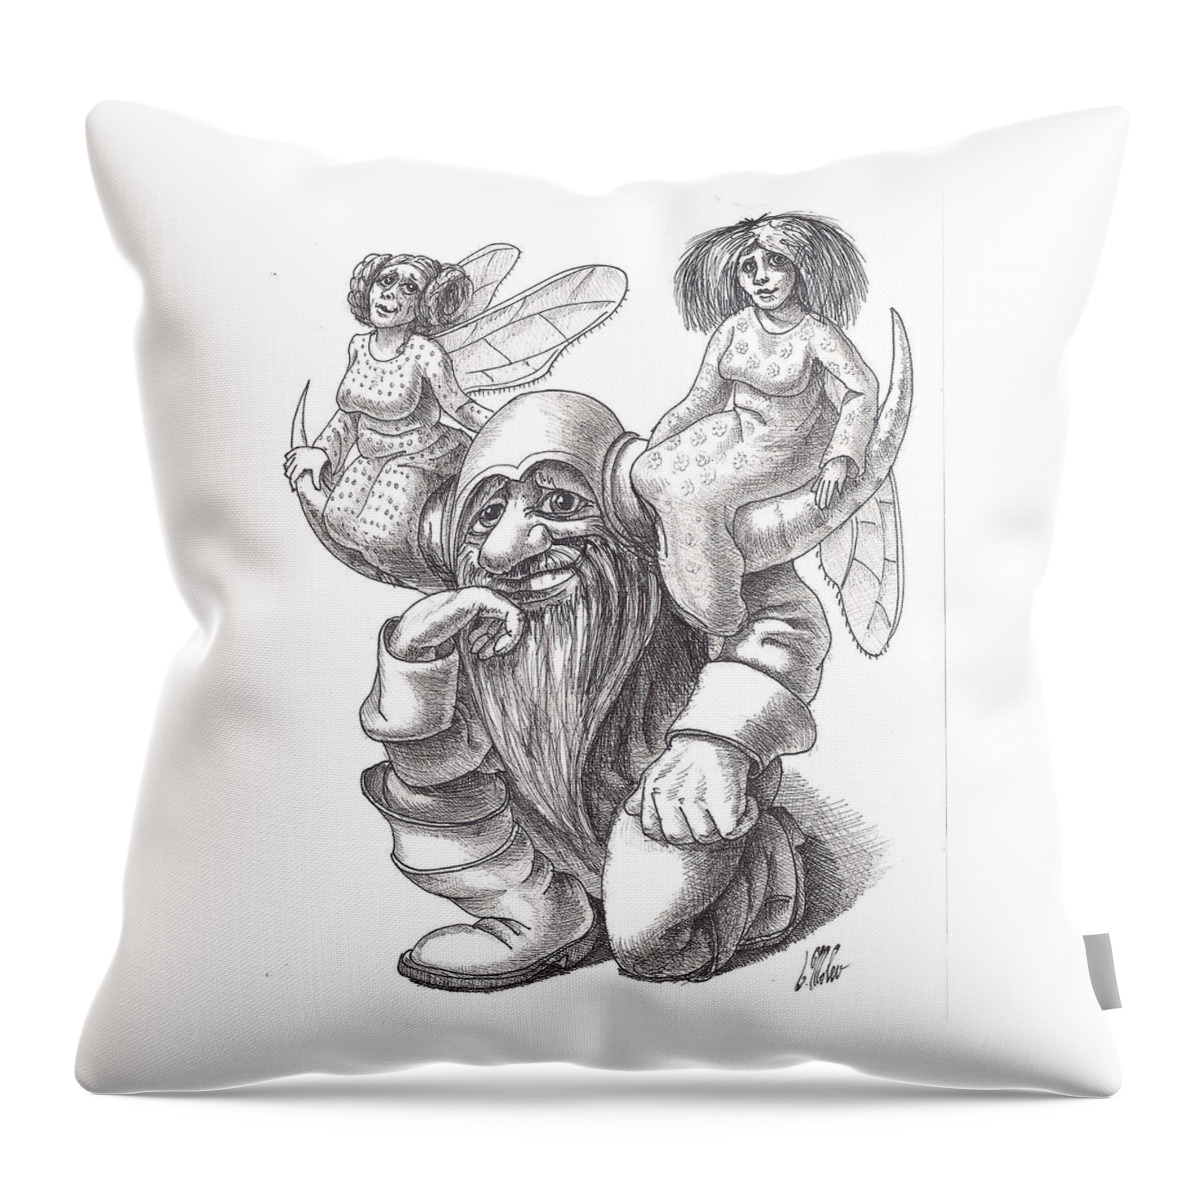  Fairy Tale. Illustrative Throw Pillow featuring the drawing Horns by Victor Molev